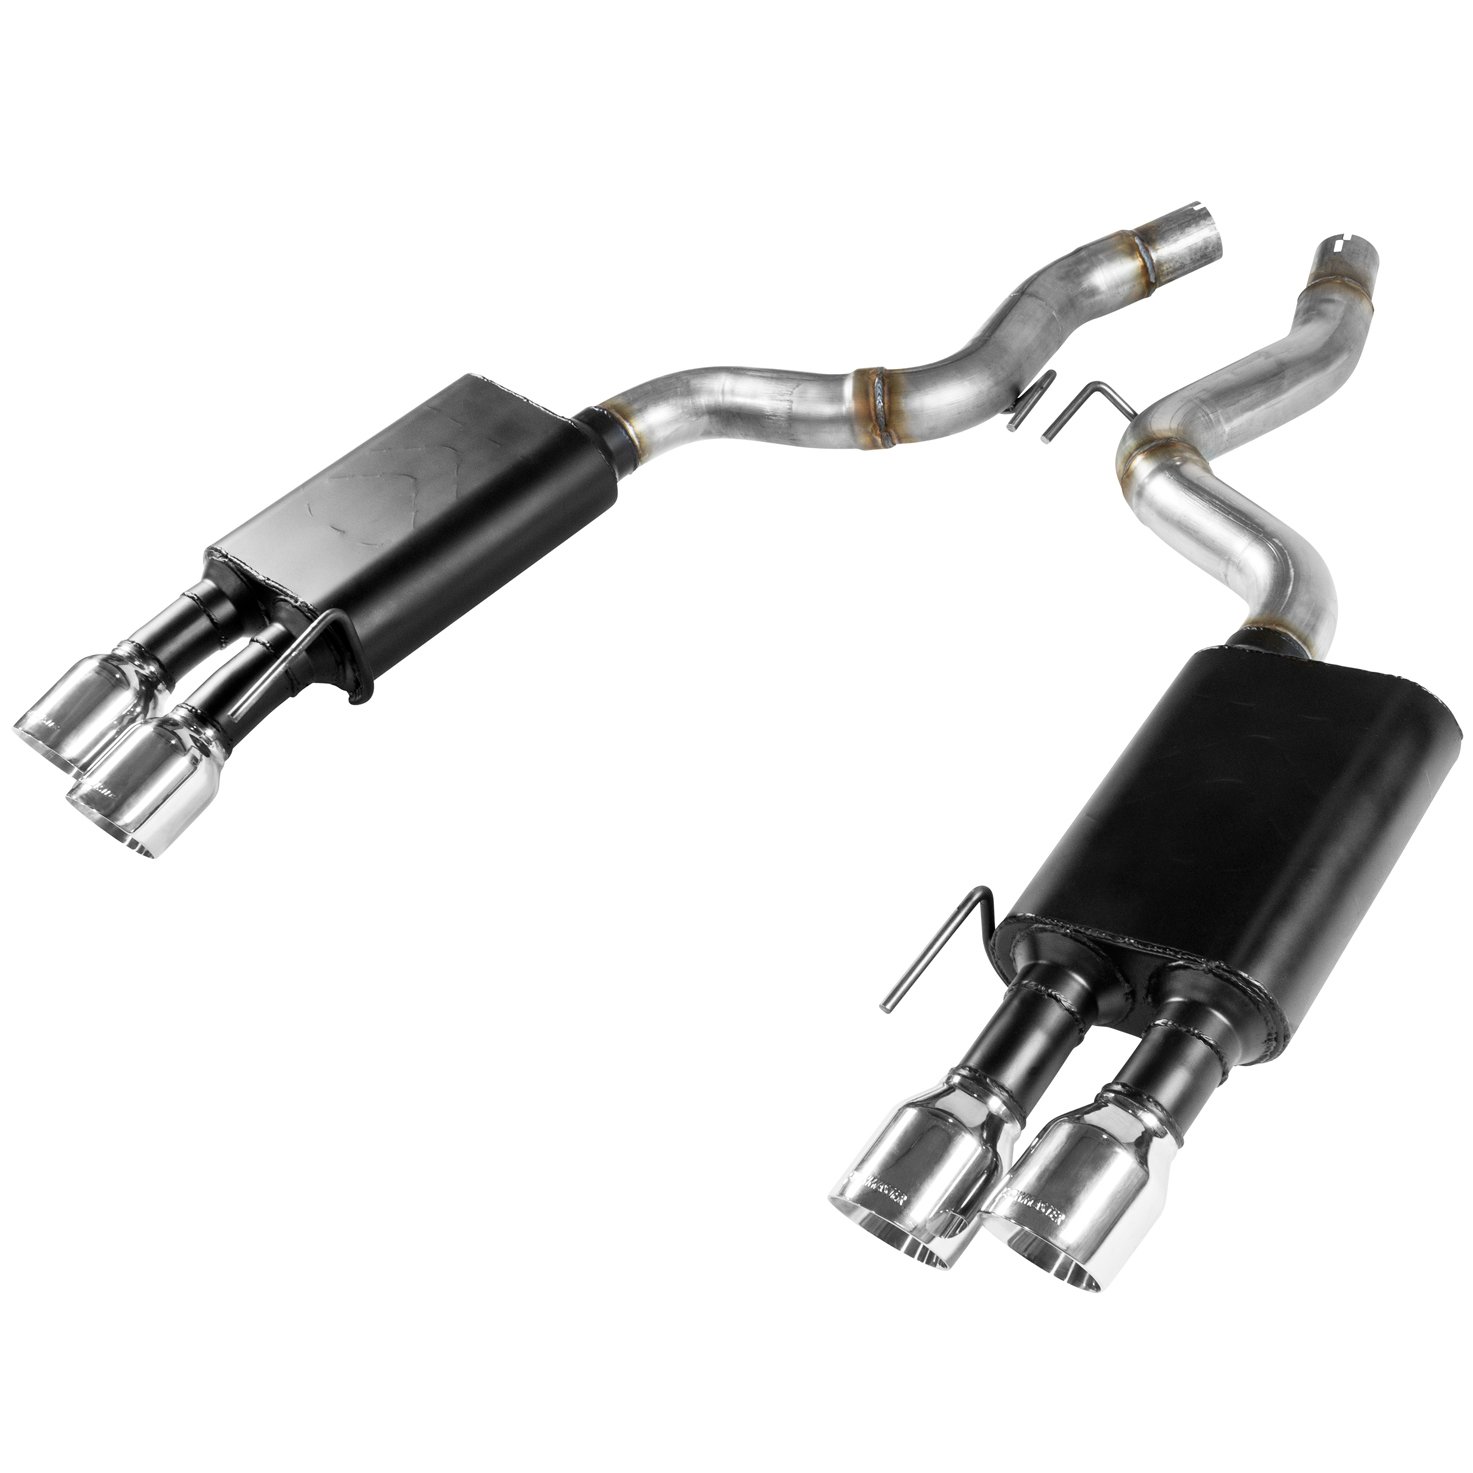 Flowmaster American Thunder Exhaust Systems for Cars - JEGS